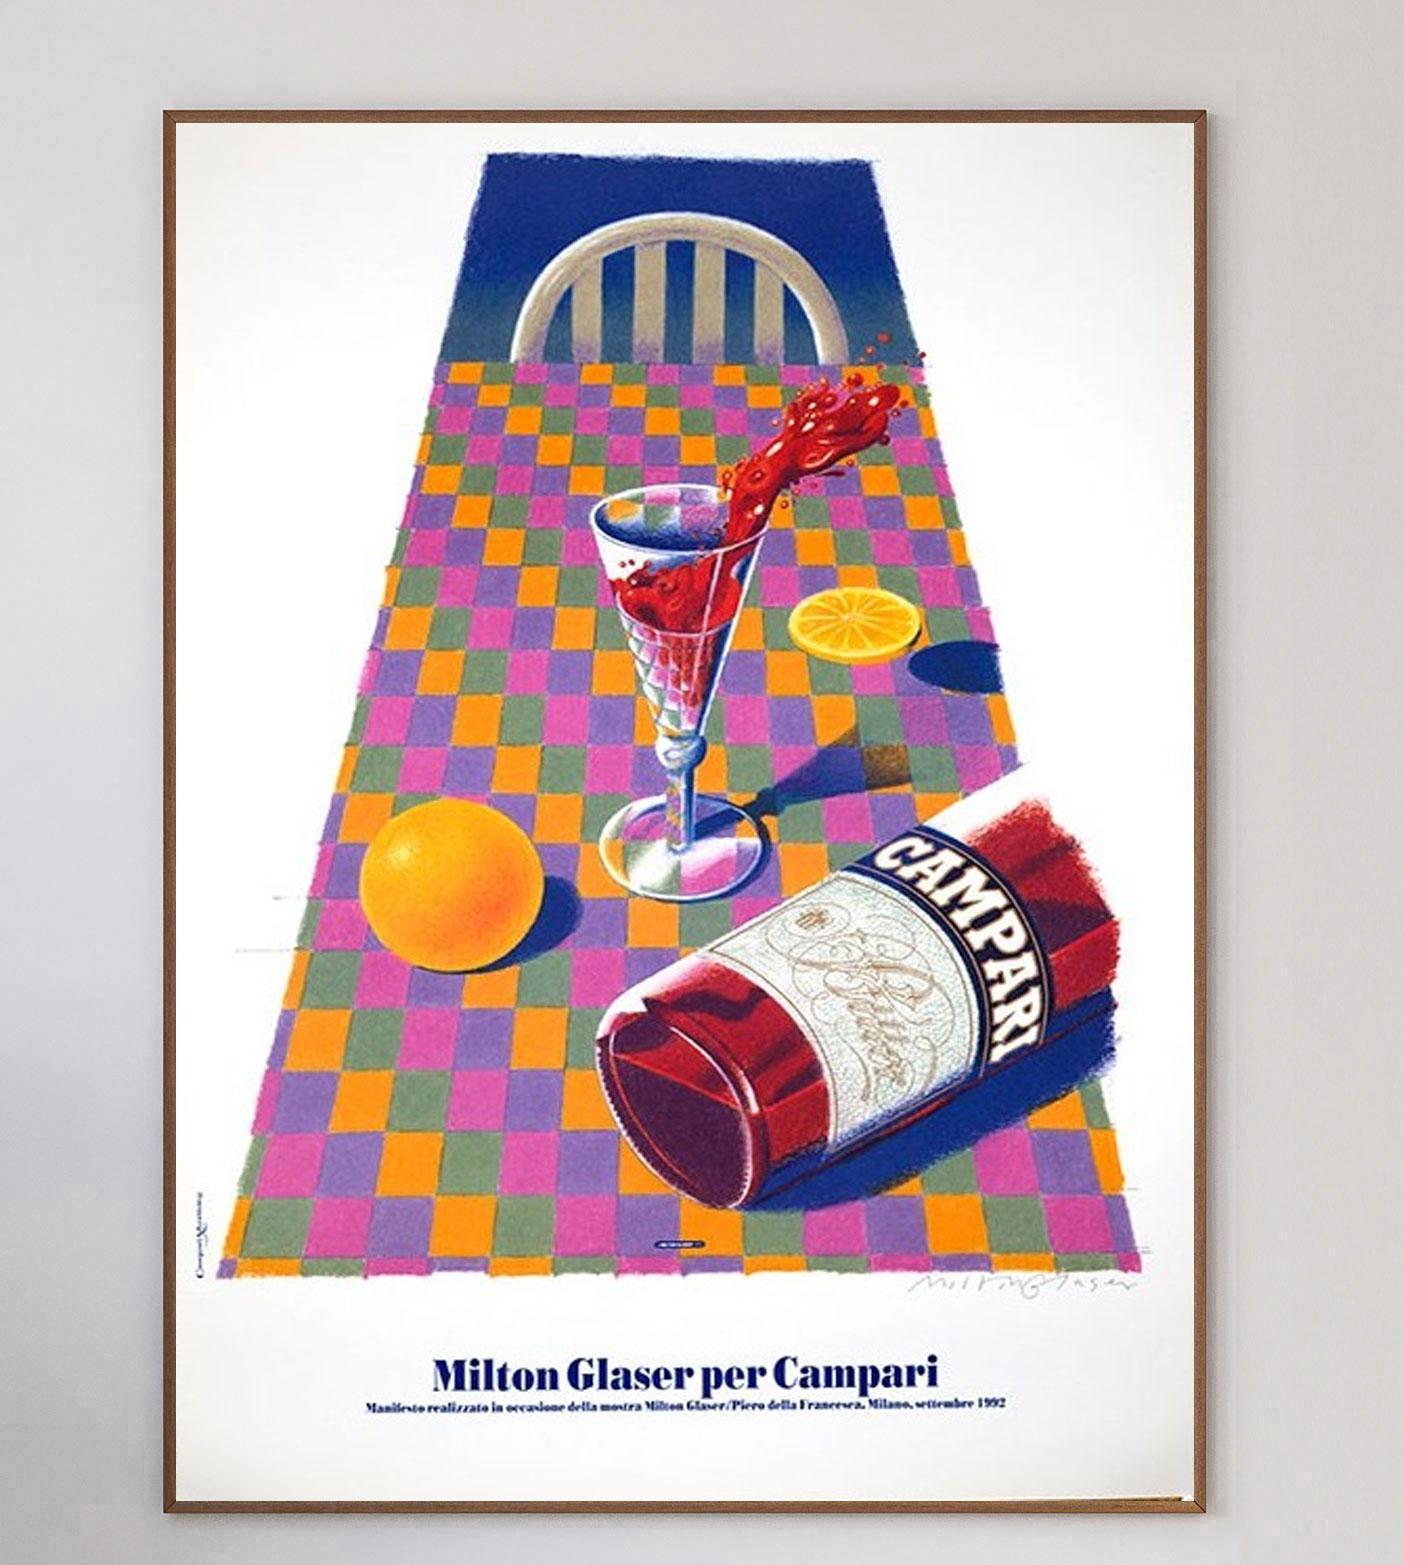 Iconic Italian liqueur brand Campari hired the renowned American graphic designer Milton Glaser in 1992 to create a series of artworks to promote the drink.

Campari was formed in 1860 by Gaspare Campari and the aperitif is as popular today as